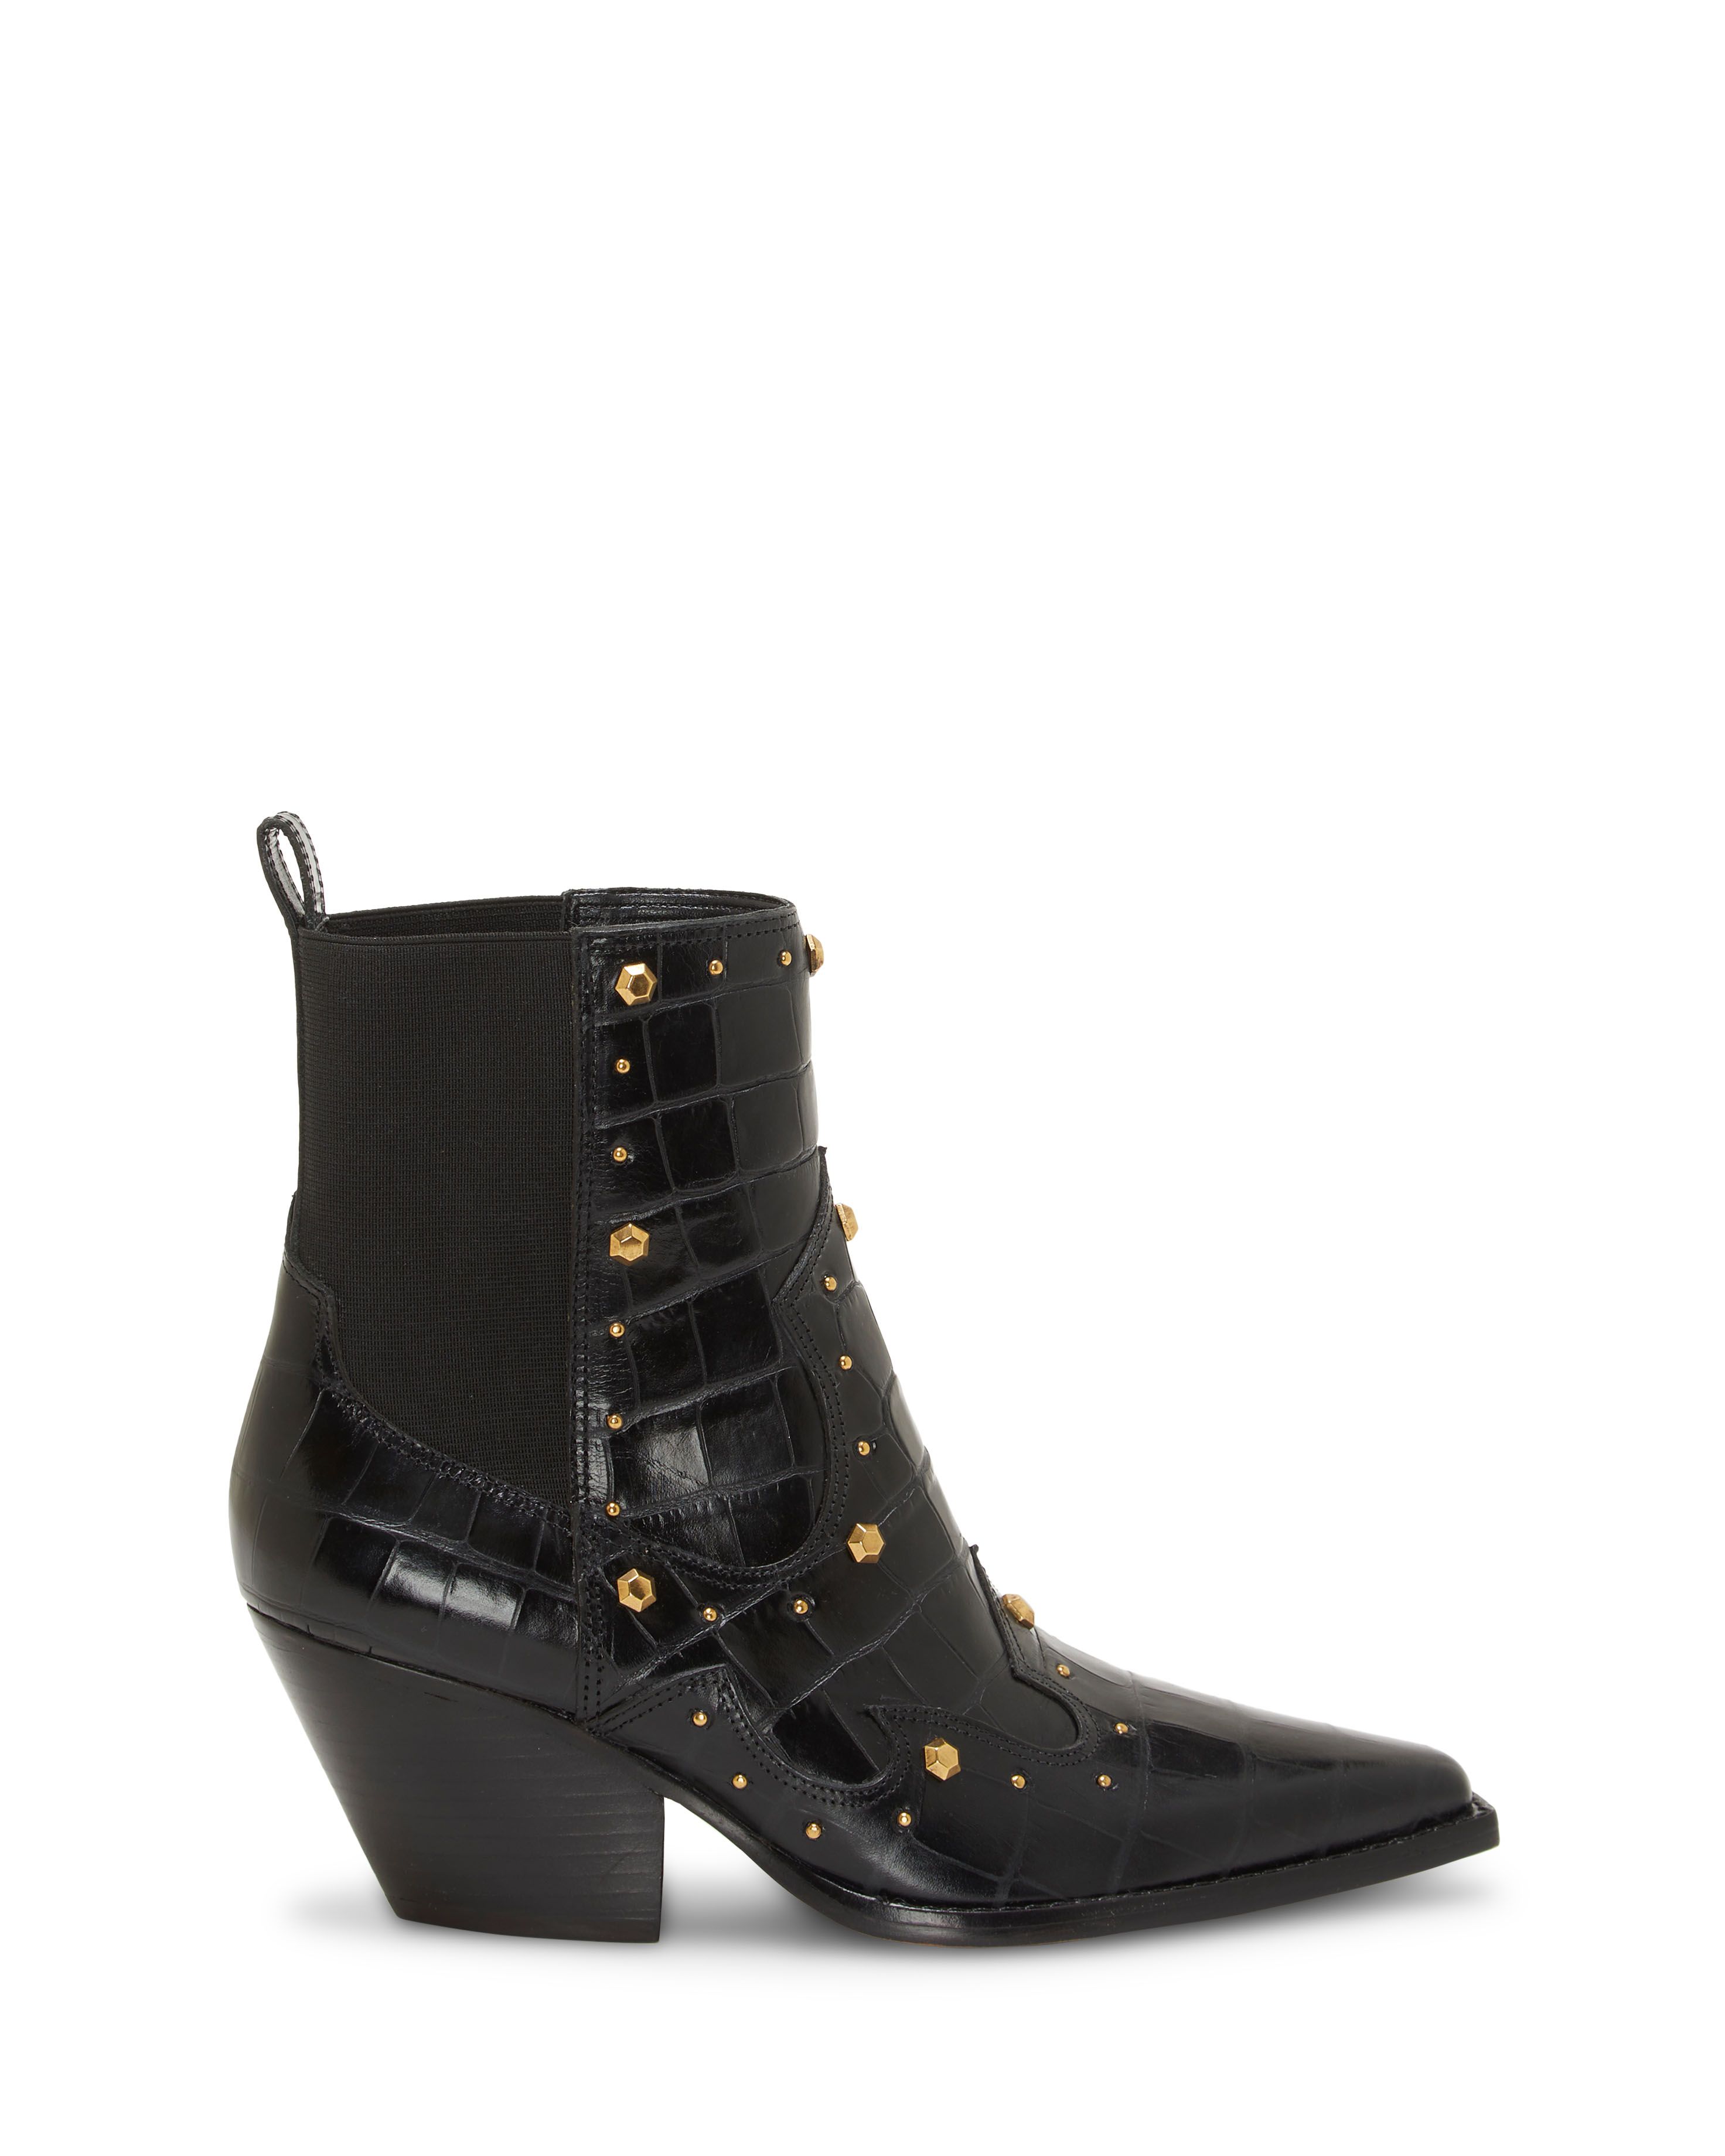 Norley Bootie | Vince Camuto